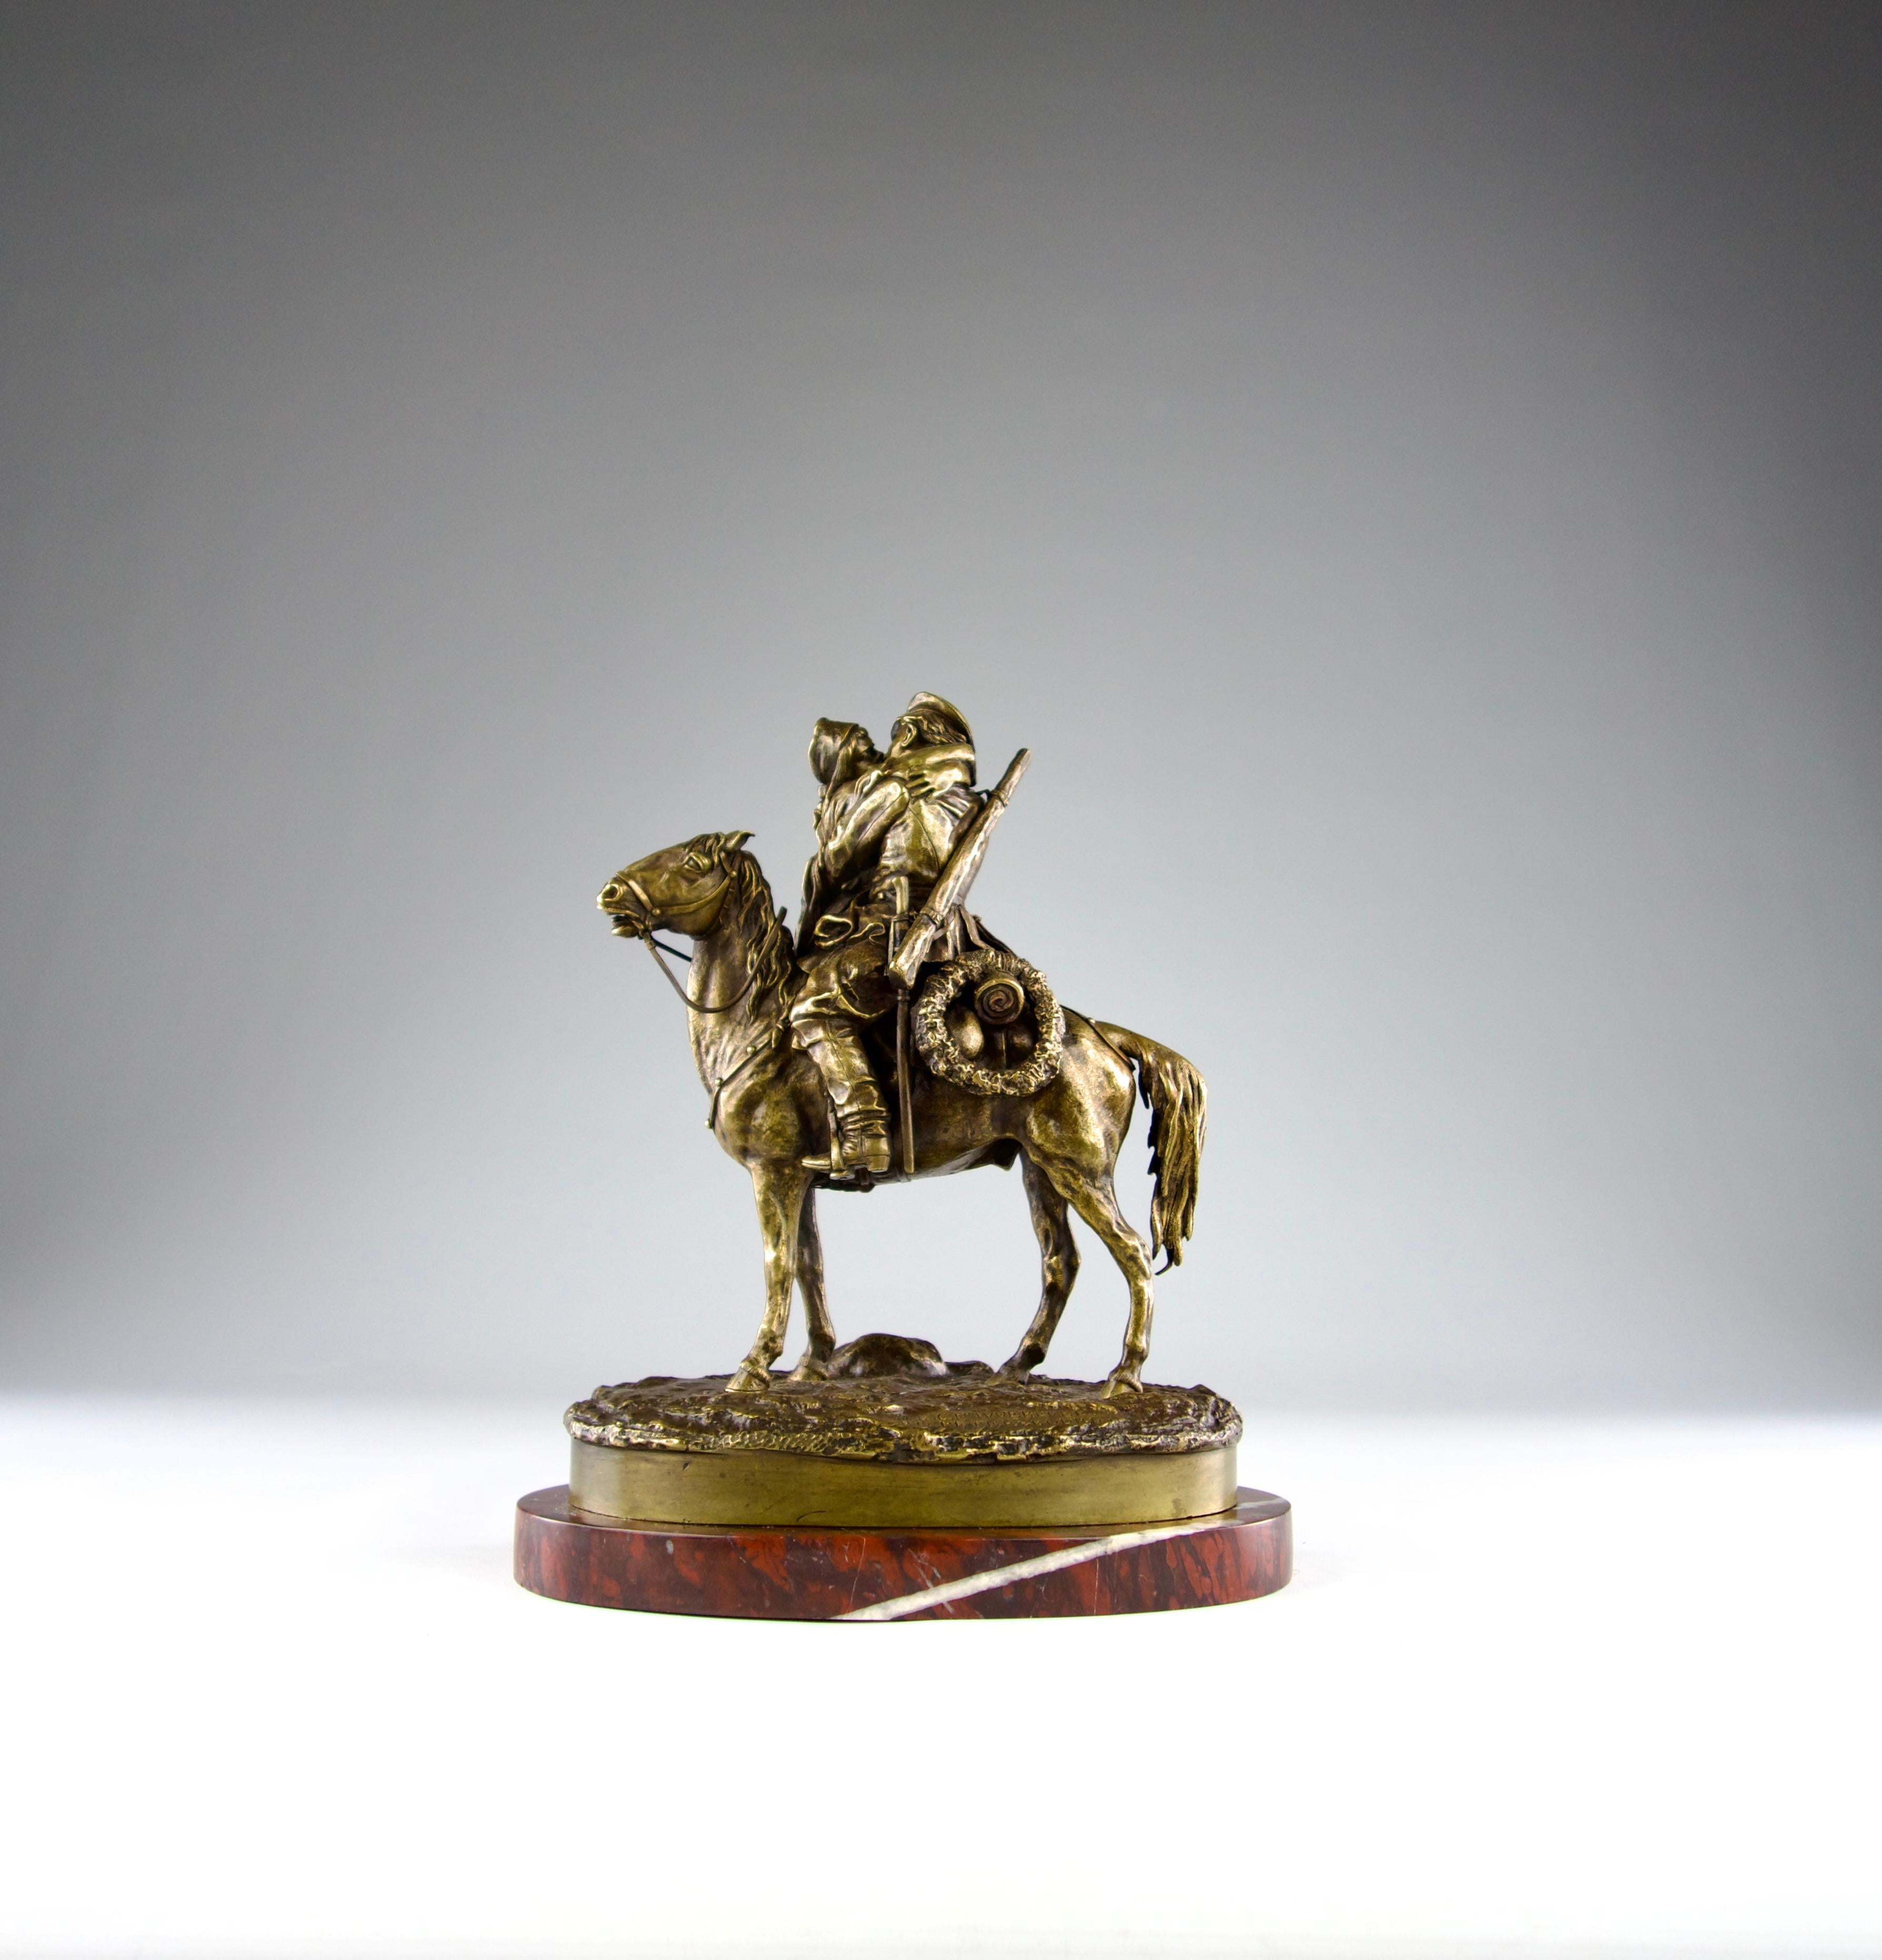 Superb gold patina bronze sculpture on a griotte marble base of a cossack on horseback and military garb embracing a woman. By Alexei Petrovitch Gratchev, Russia 19th century. Signed by the artist and foundry 